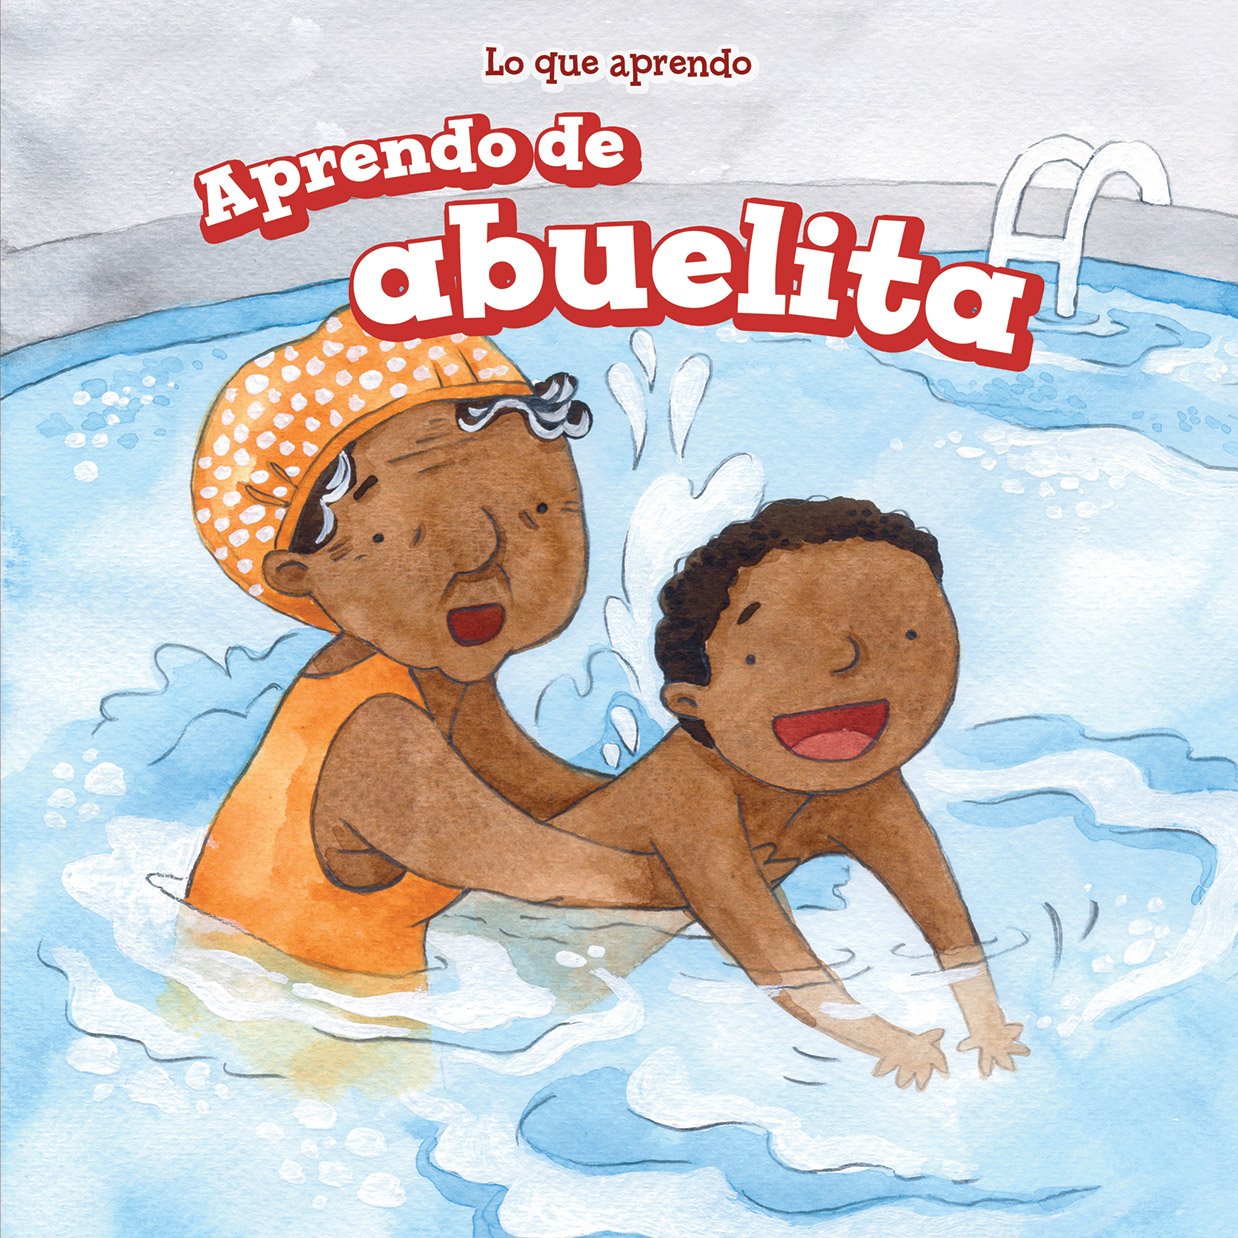 Illustration of boy with his grandma in a pool